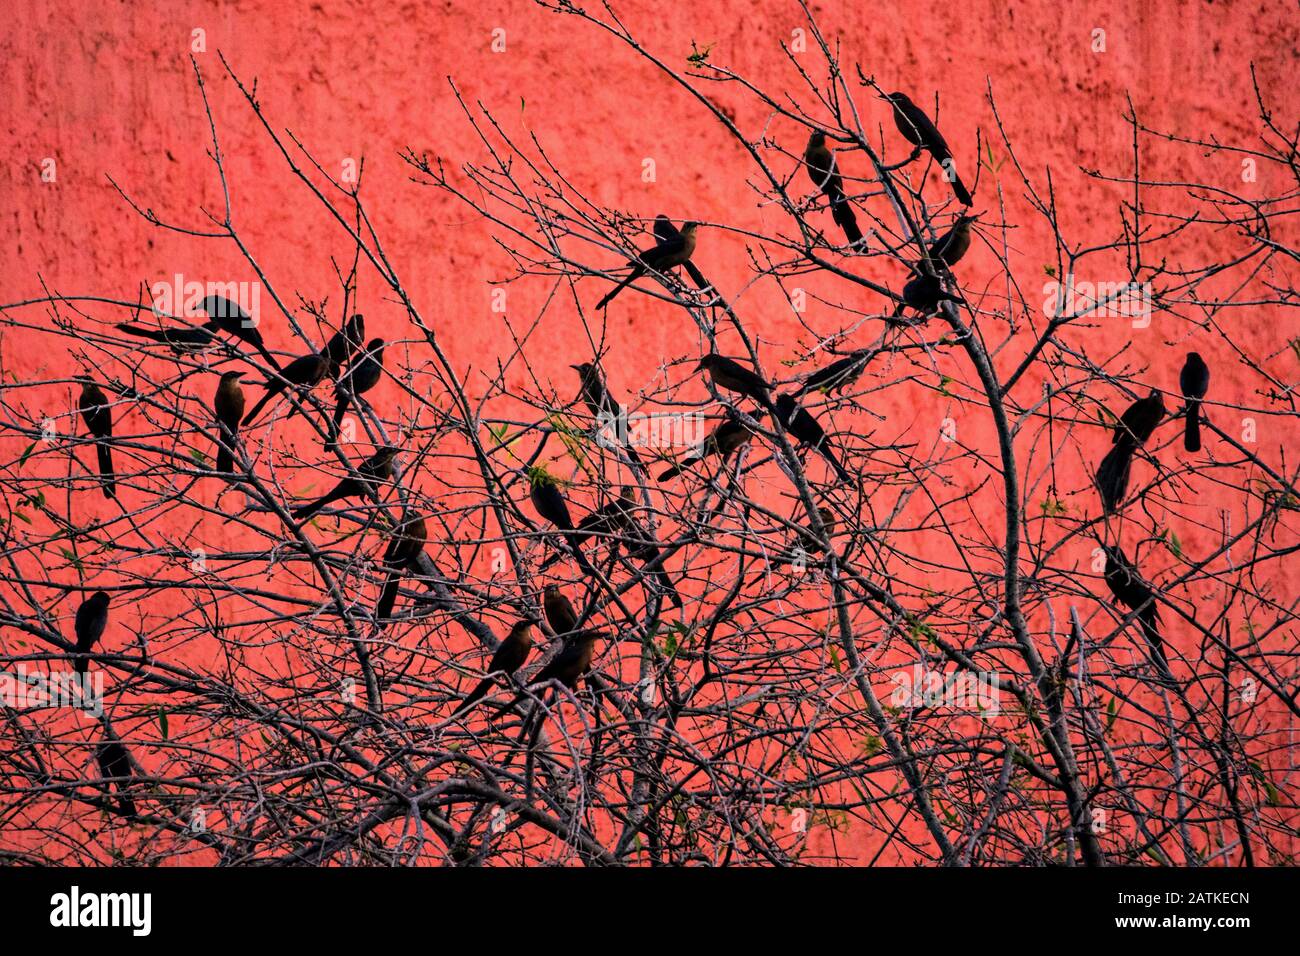 A flock of Great-Tailed Grackles are silhouetted against the red Lighthouse of Commerce or Faro de Comercio monument in the Macroplaza square in the Barrio Antiguo neighborhood of Monterrey, Nuevo Leon, Mexico. The modernist monument was designed by Mexican architect Luis Barragan and built to commemoration the100th anniversary of the Monterrey Chamber of Commerce. Stock Photo